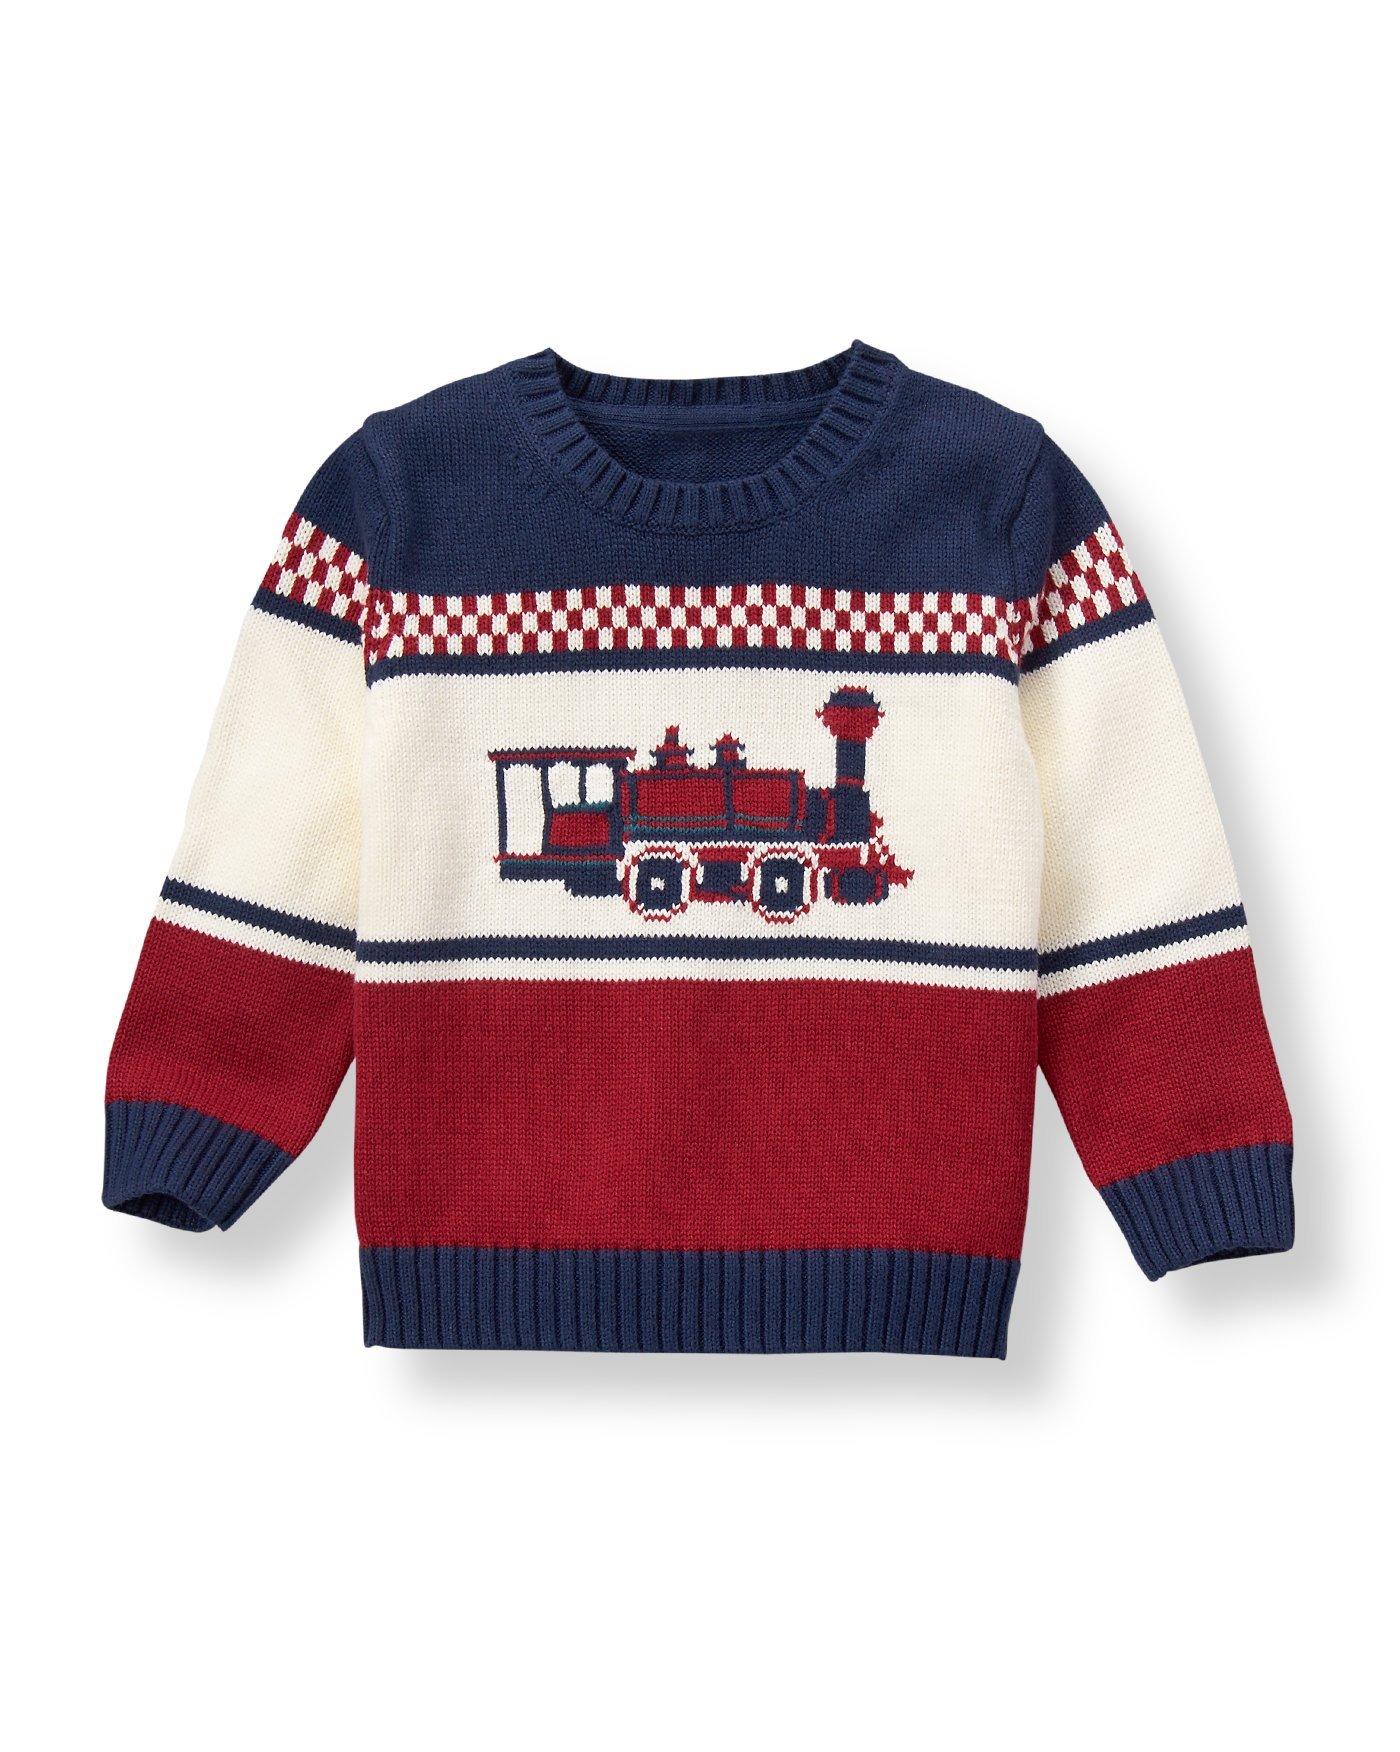 Train Sweater image number 0